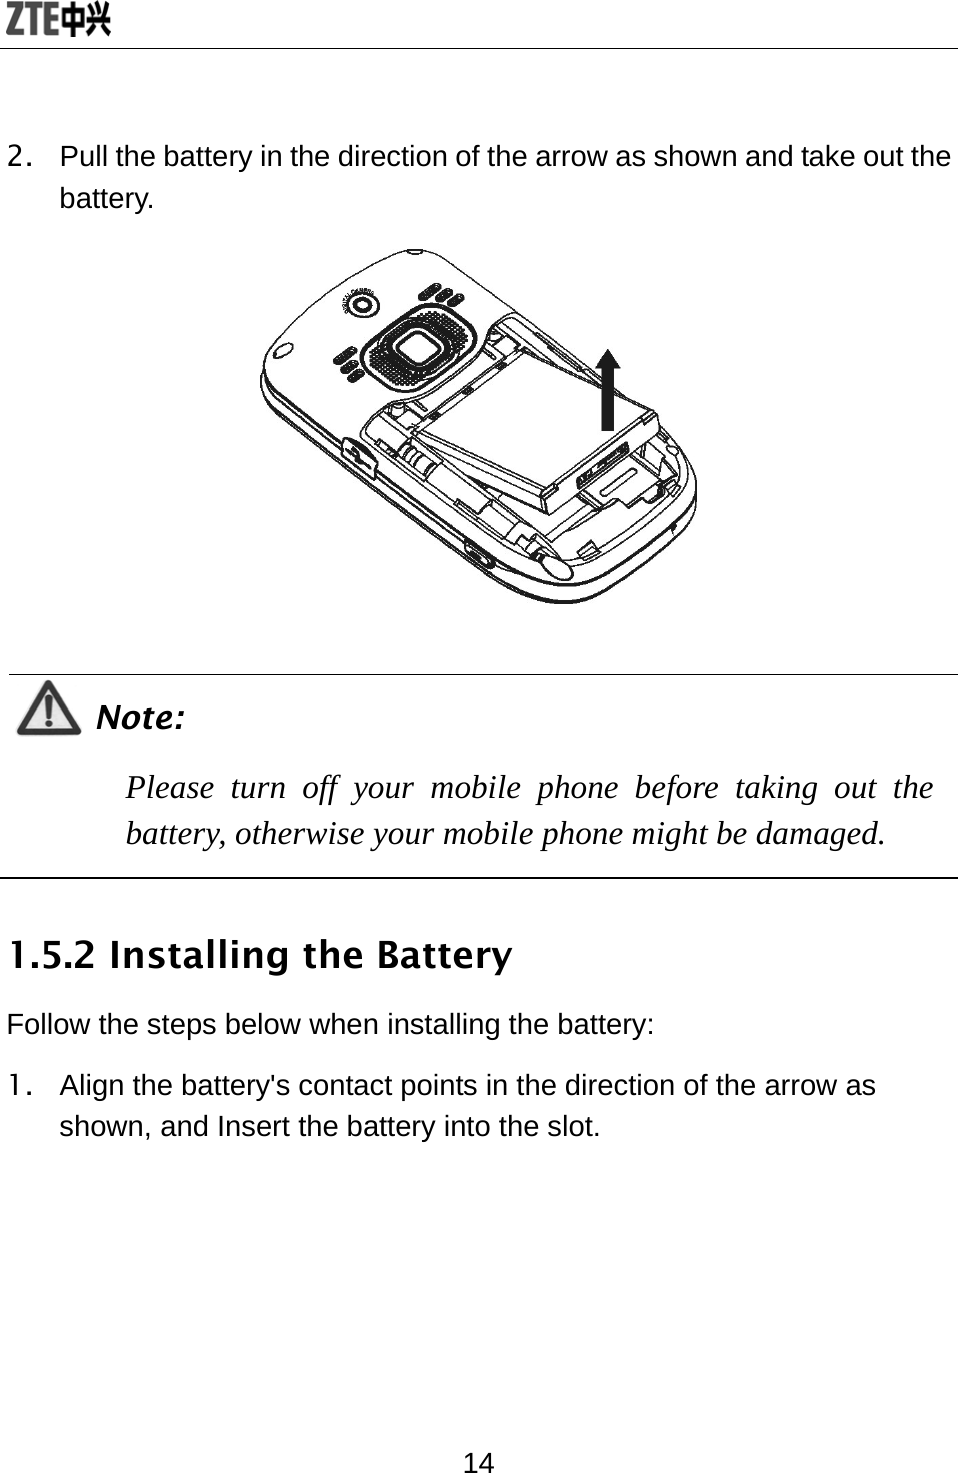  14 2.  Pull the battery in the direction of the arrow as shown and take out the battery.   Note: Please turn off your mobile phone before taking out the battery, otherwise your mobile phone might be damaged.  1.5.2 Installing the Battery Follow the steps below when installing the battery: 1.  Align the battery&apos;s contact points in the direction of the arrow as shown, and Insert the battery into the slot. 